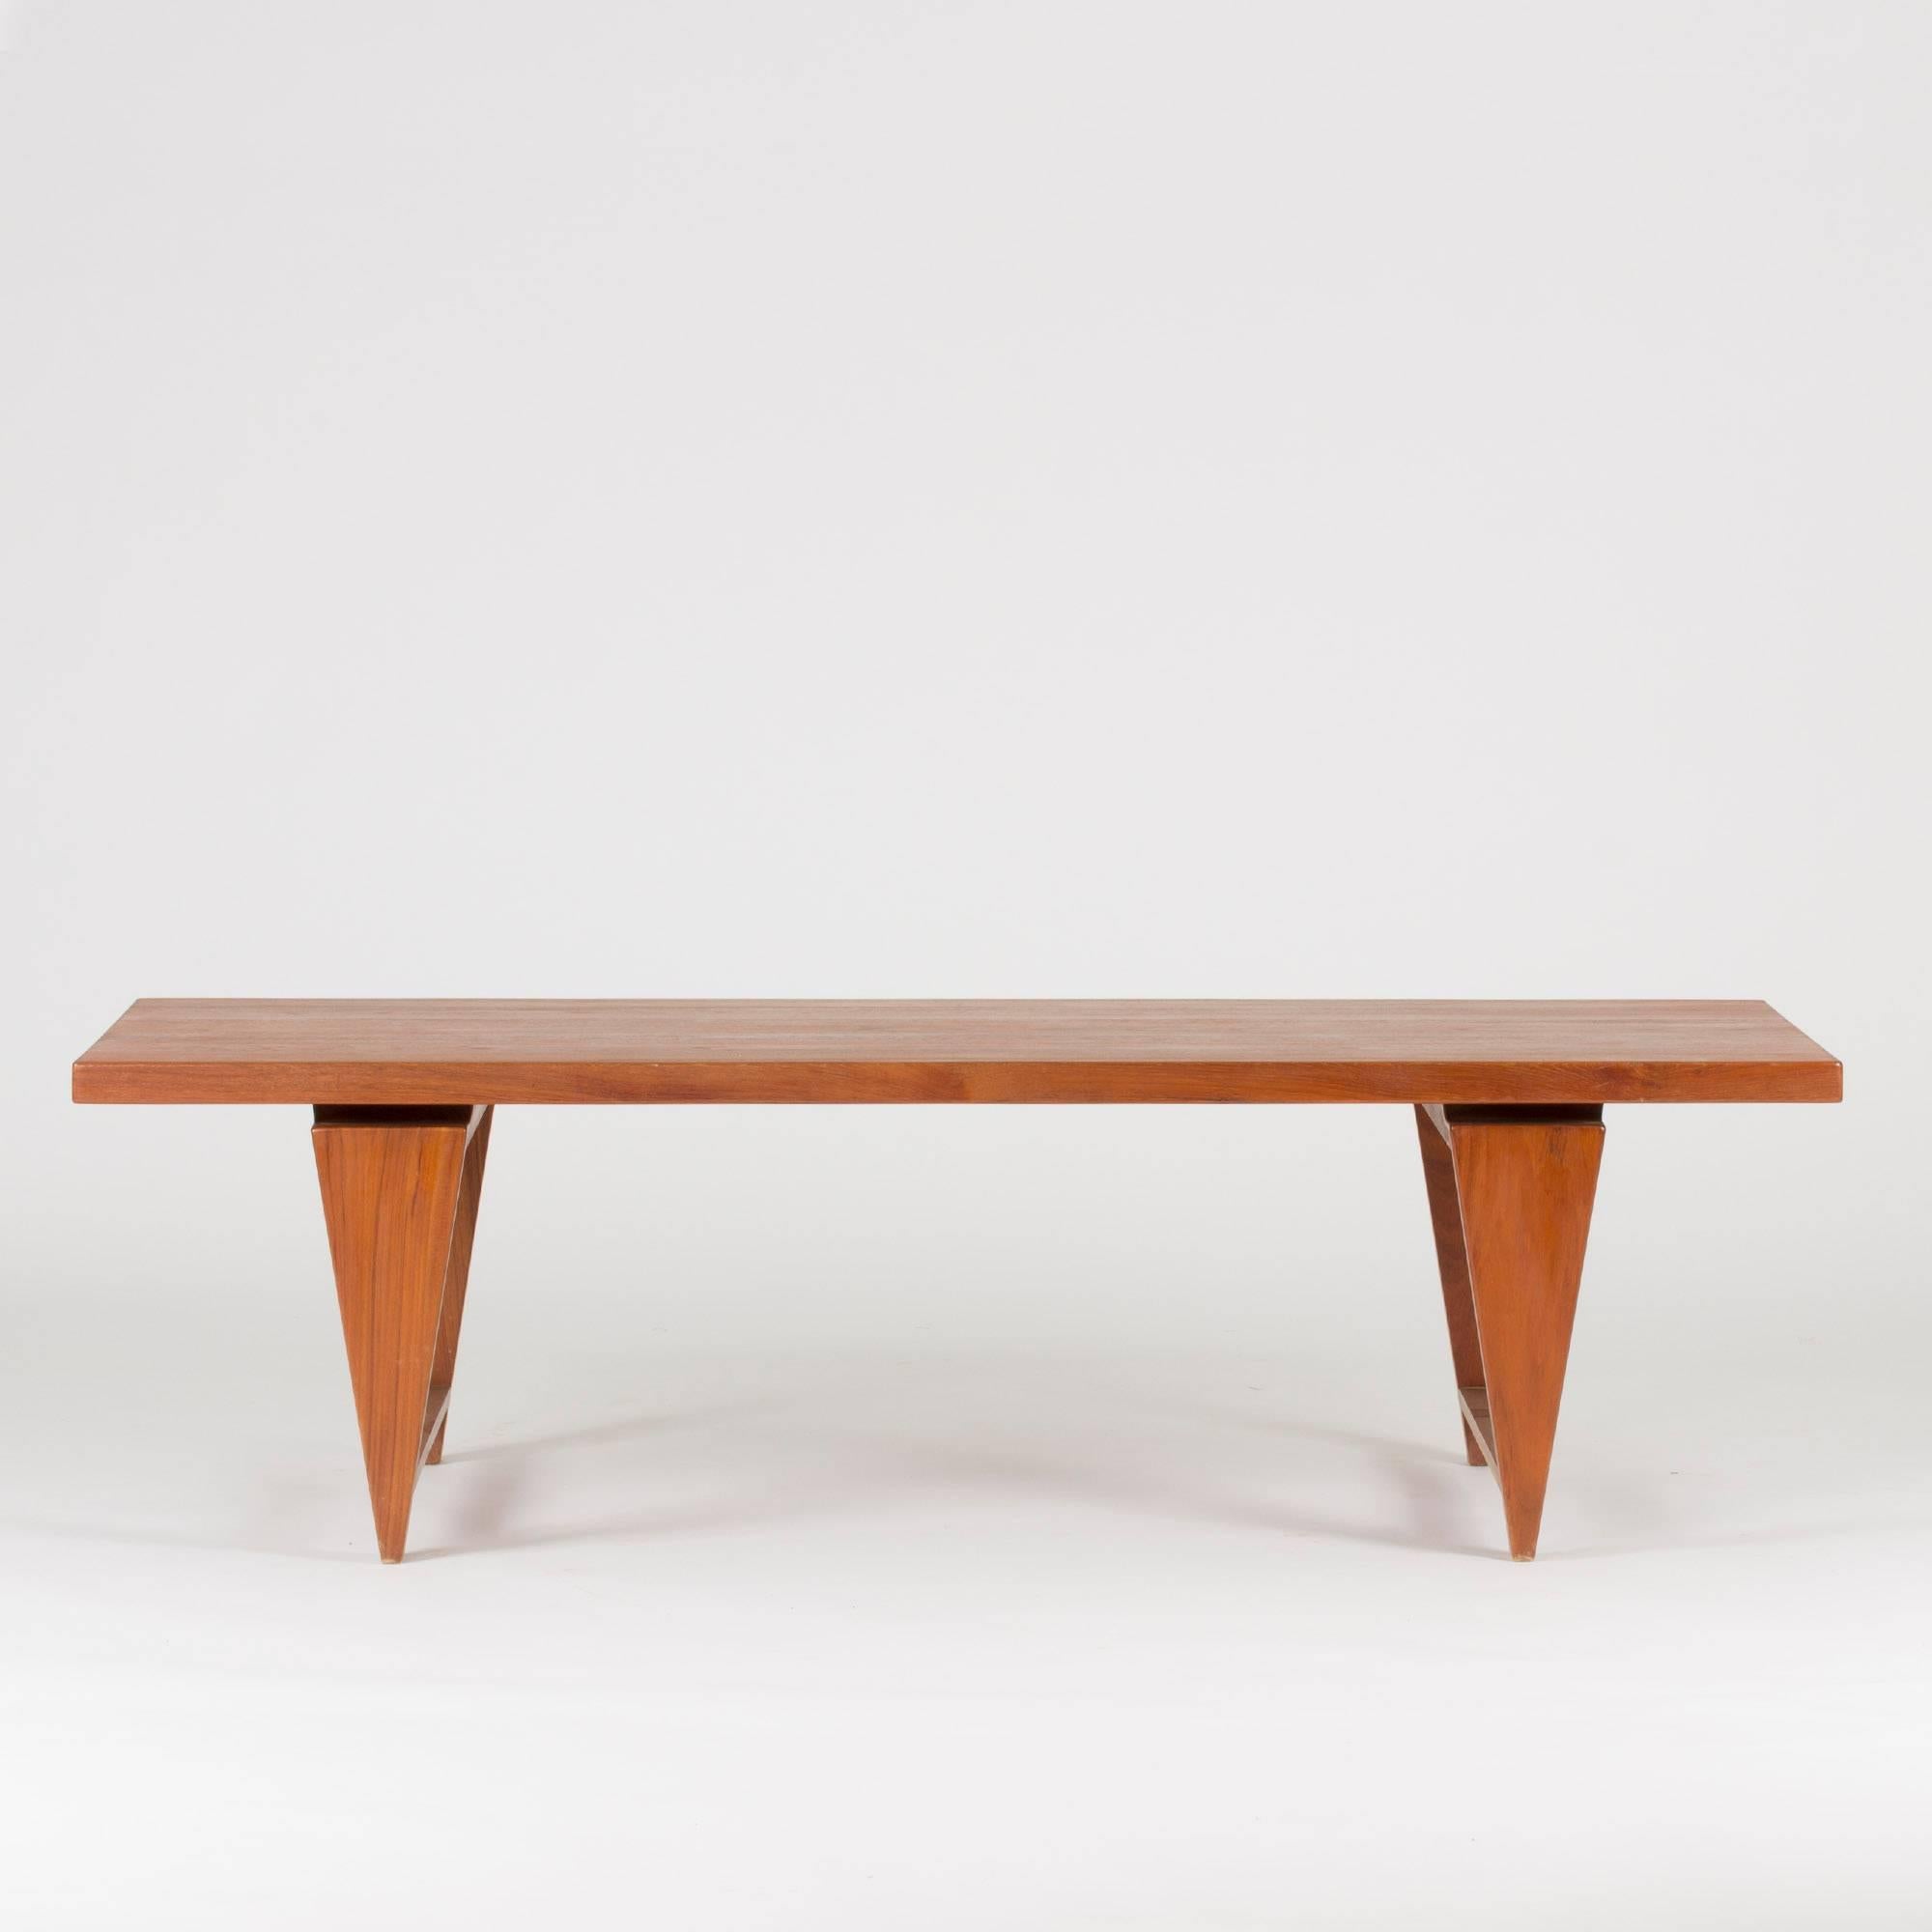 Coffee table by Illum Wikkelsø made from solid teak. Edgy details and a tabletop that seems to hover just above the base.